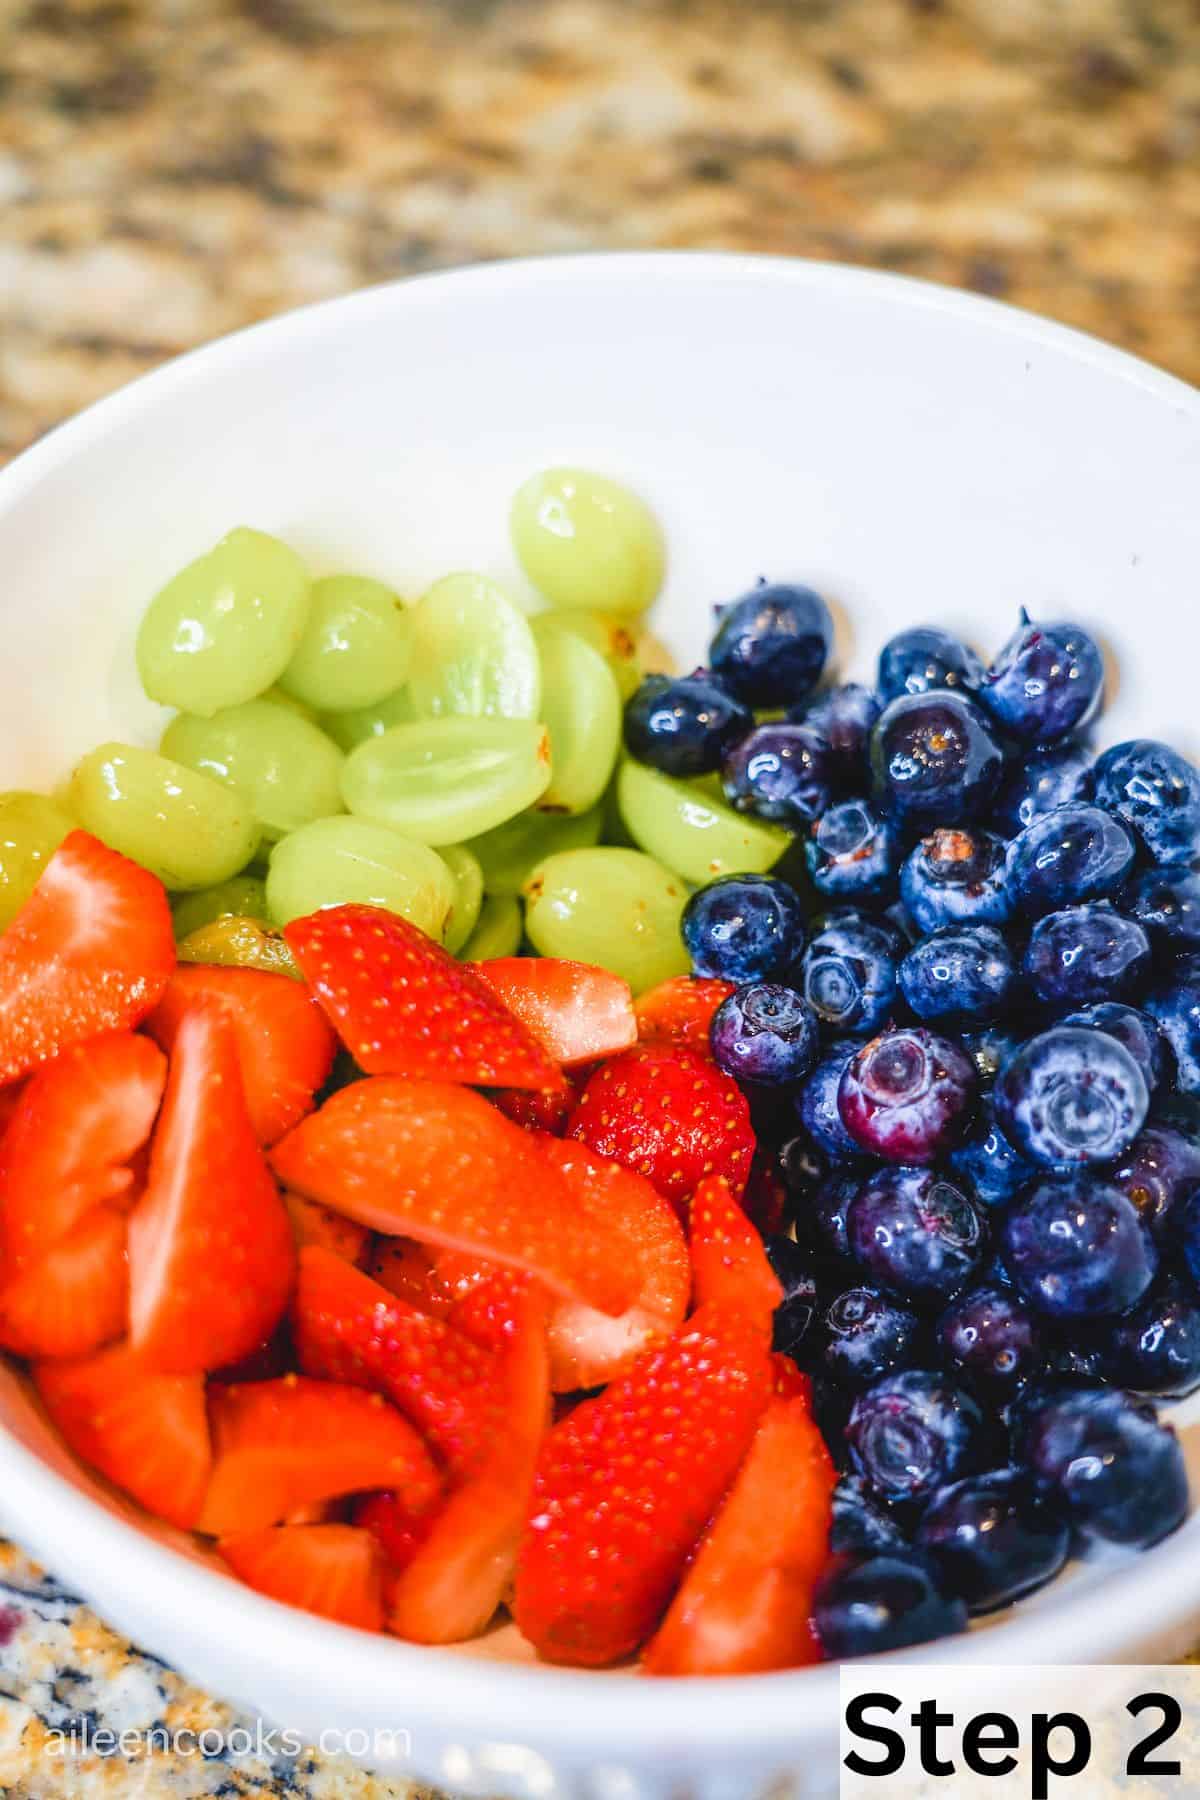 A large white bowl filled with strawberries, green grapes, and blueberries.